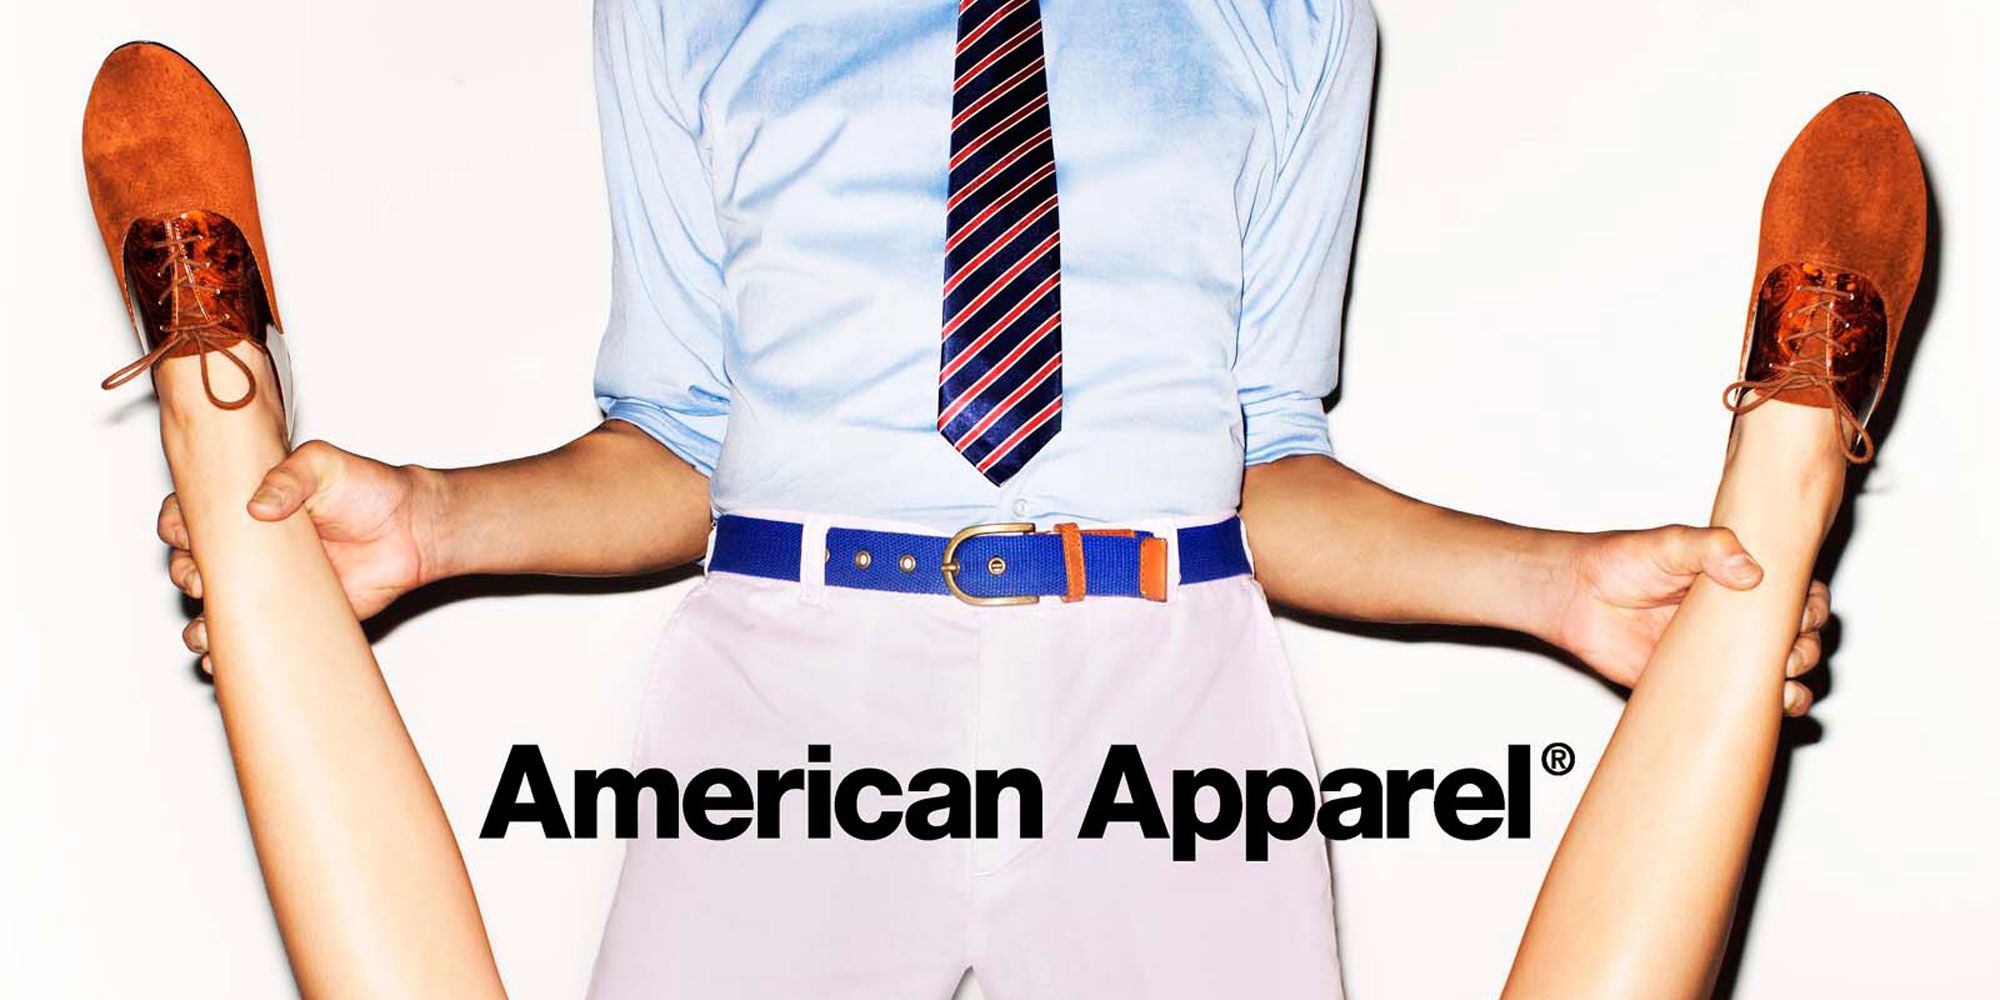 90s Porn Ads - The NSFW History of American Apparel's Ads